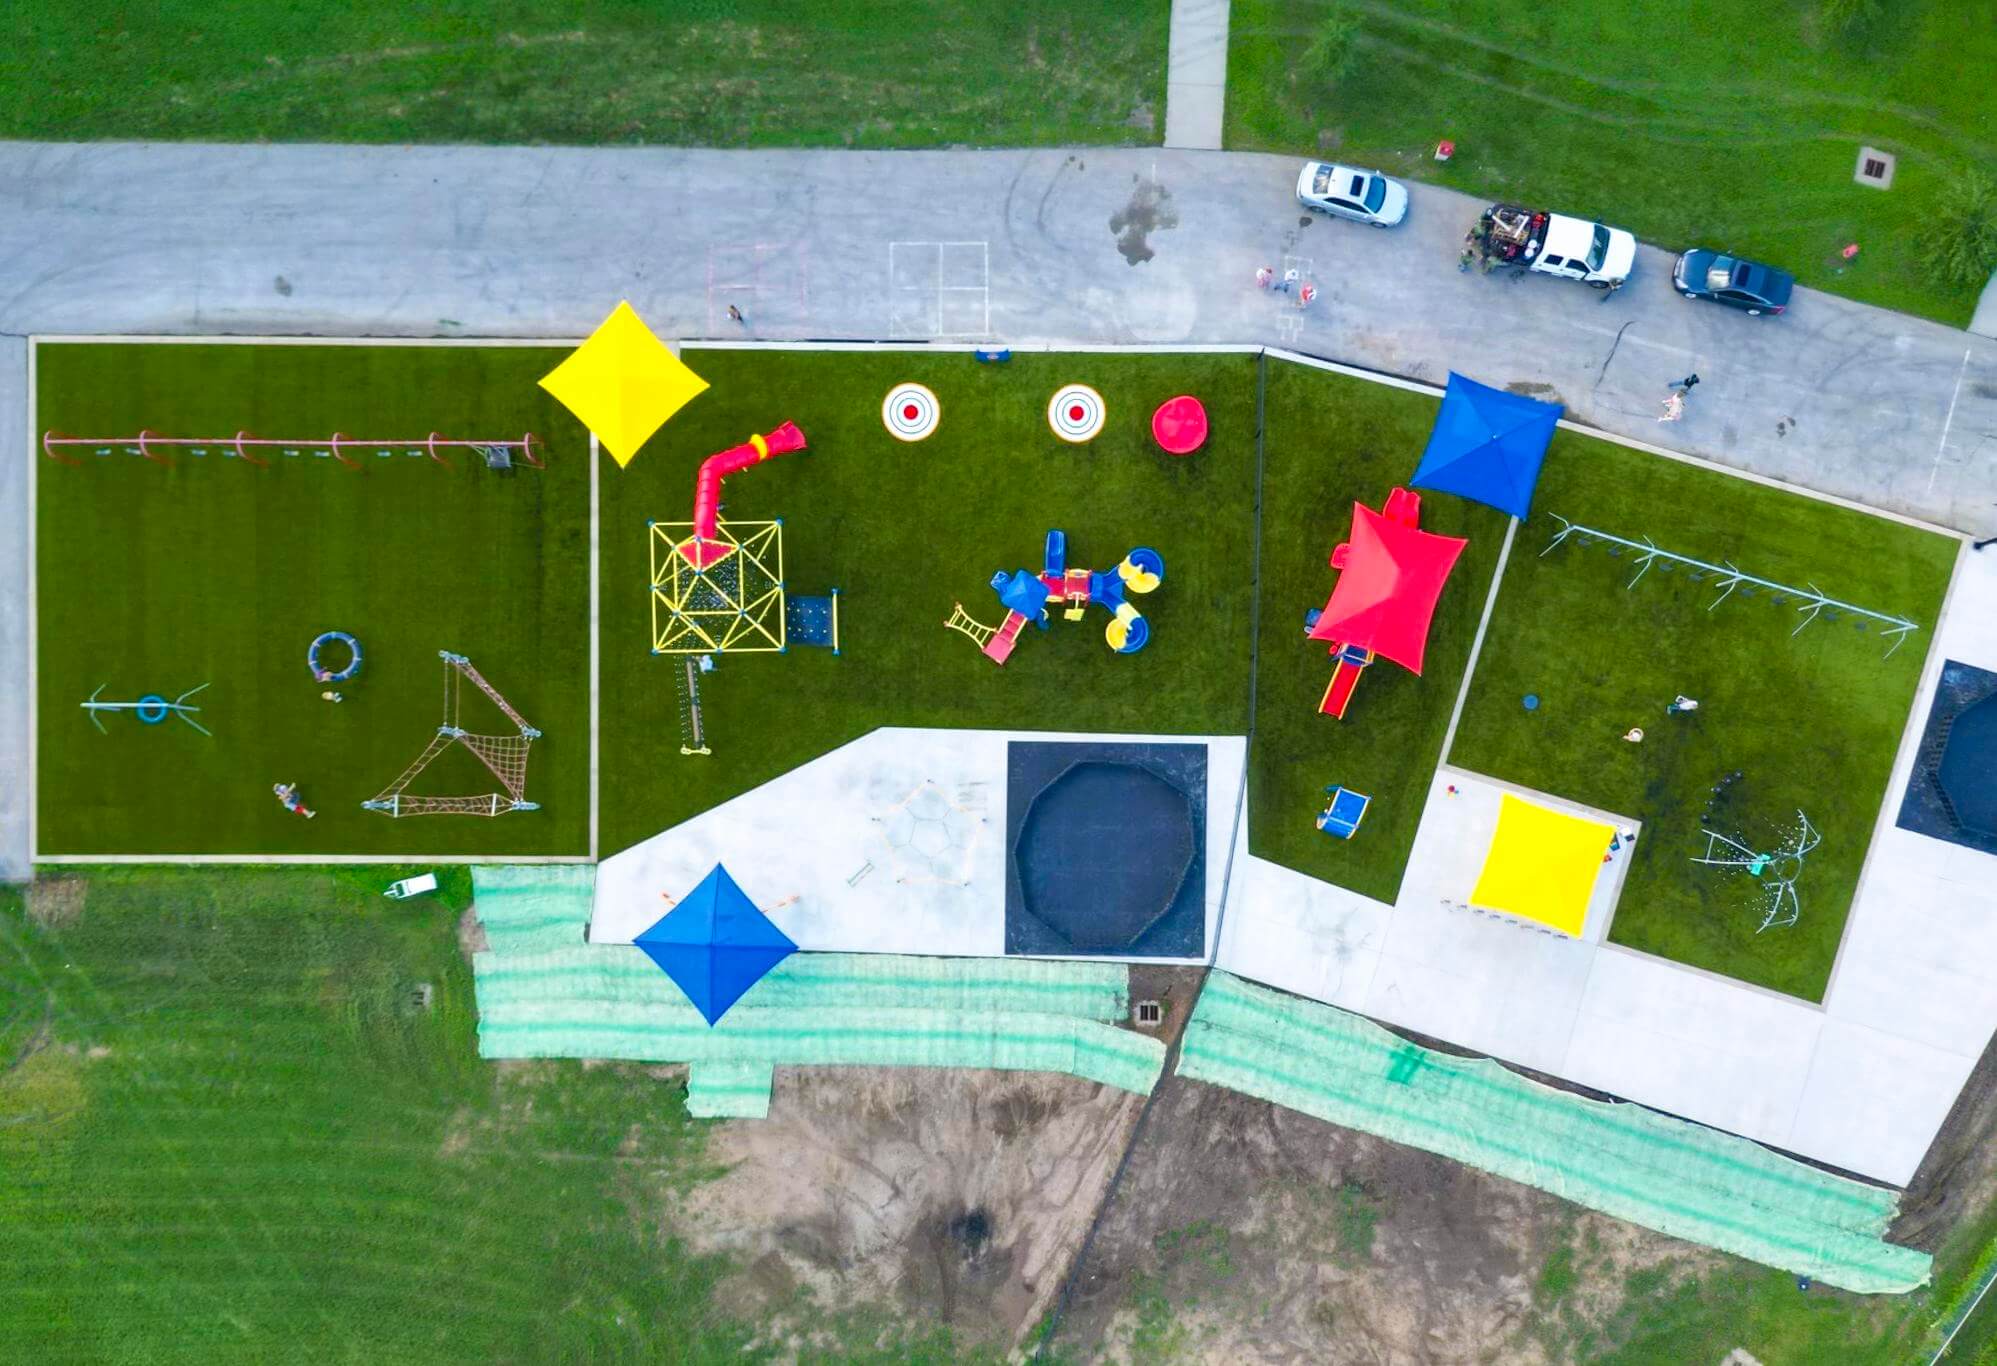 Top-down aerial shot of a playground with geometric sunshades, a sports court, and play equipment on a sunny day.